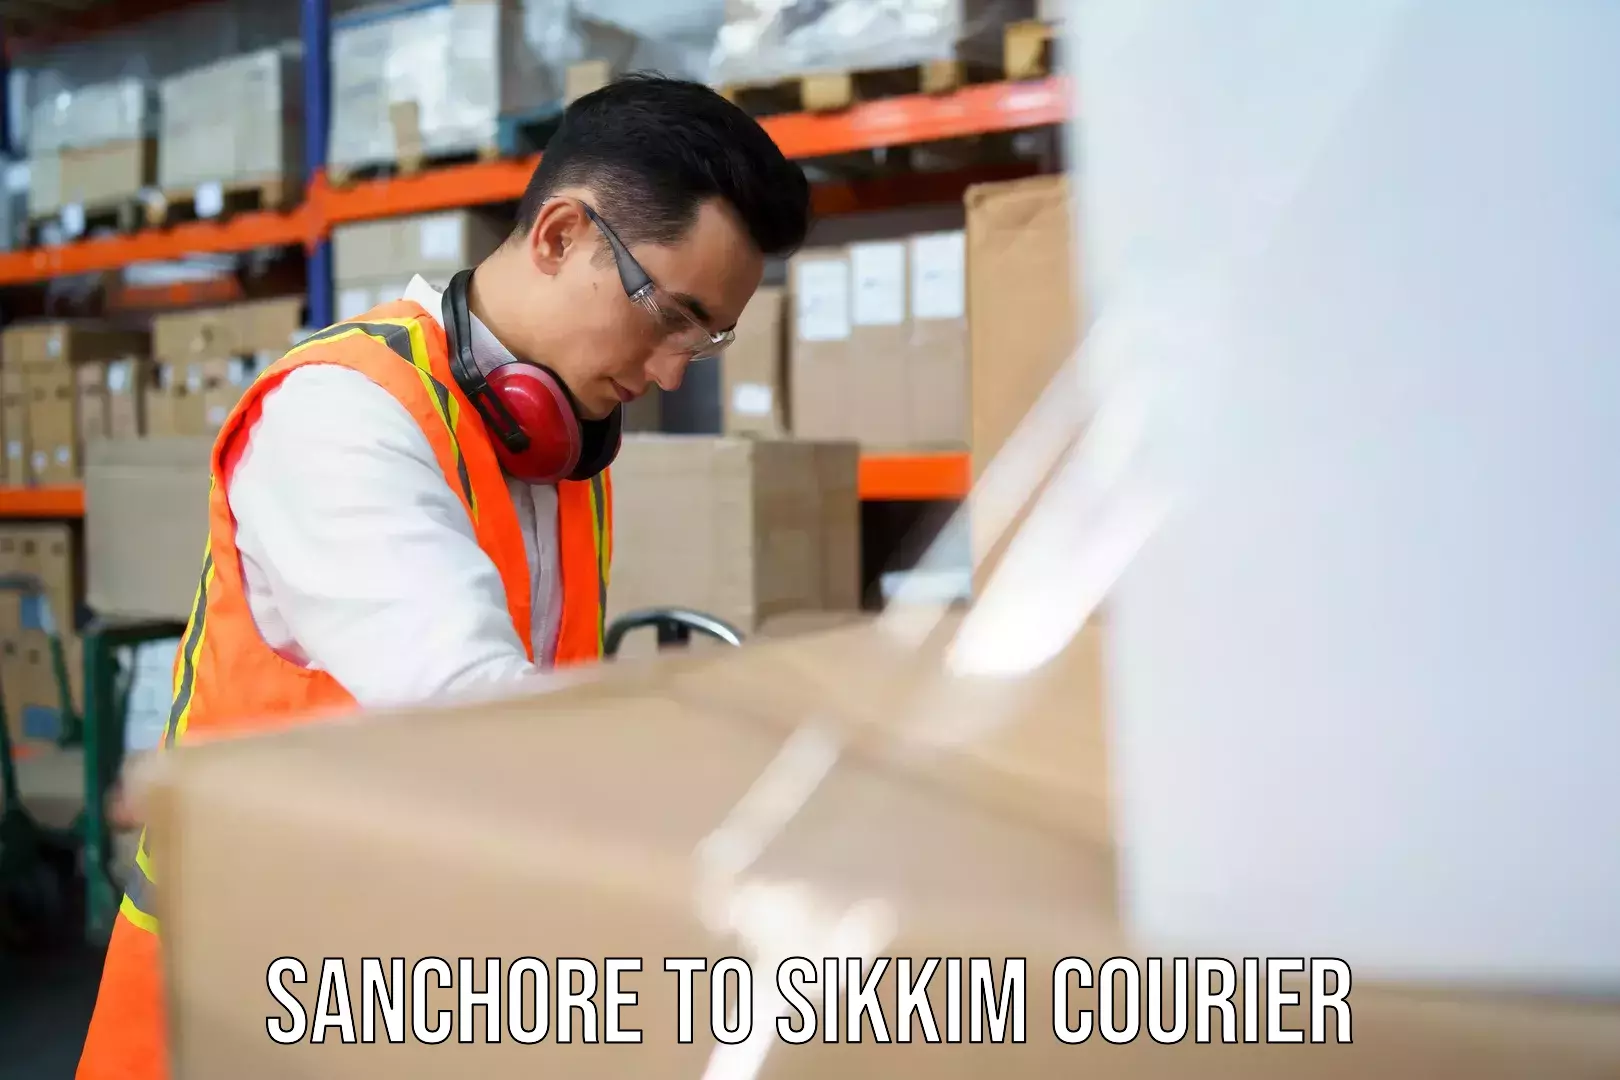 Business shipping needs Sanchore to Pelling